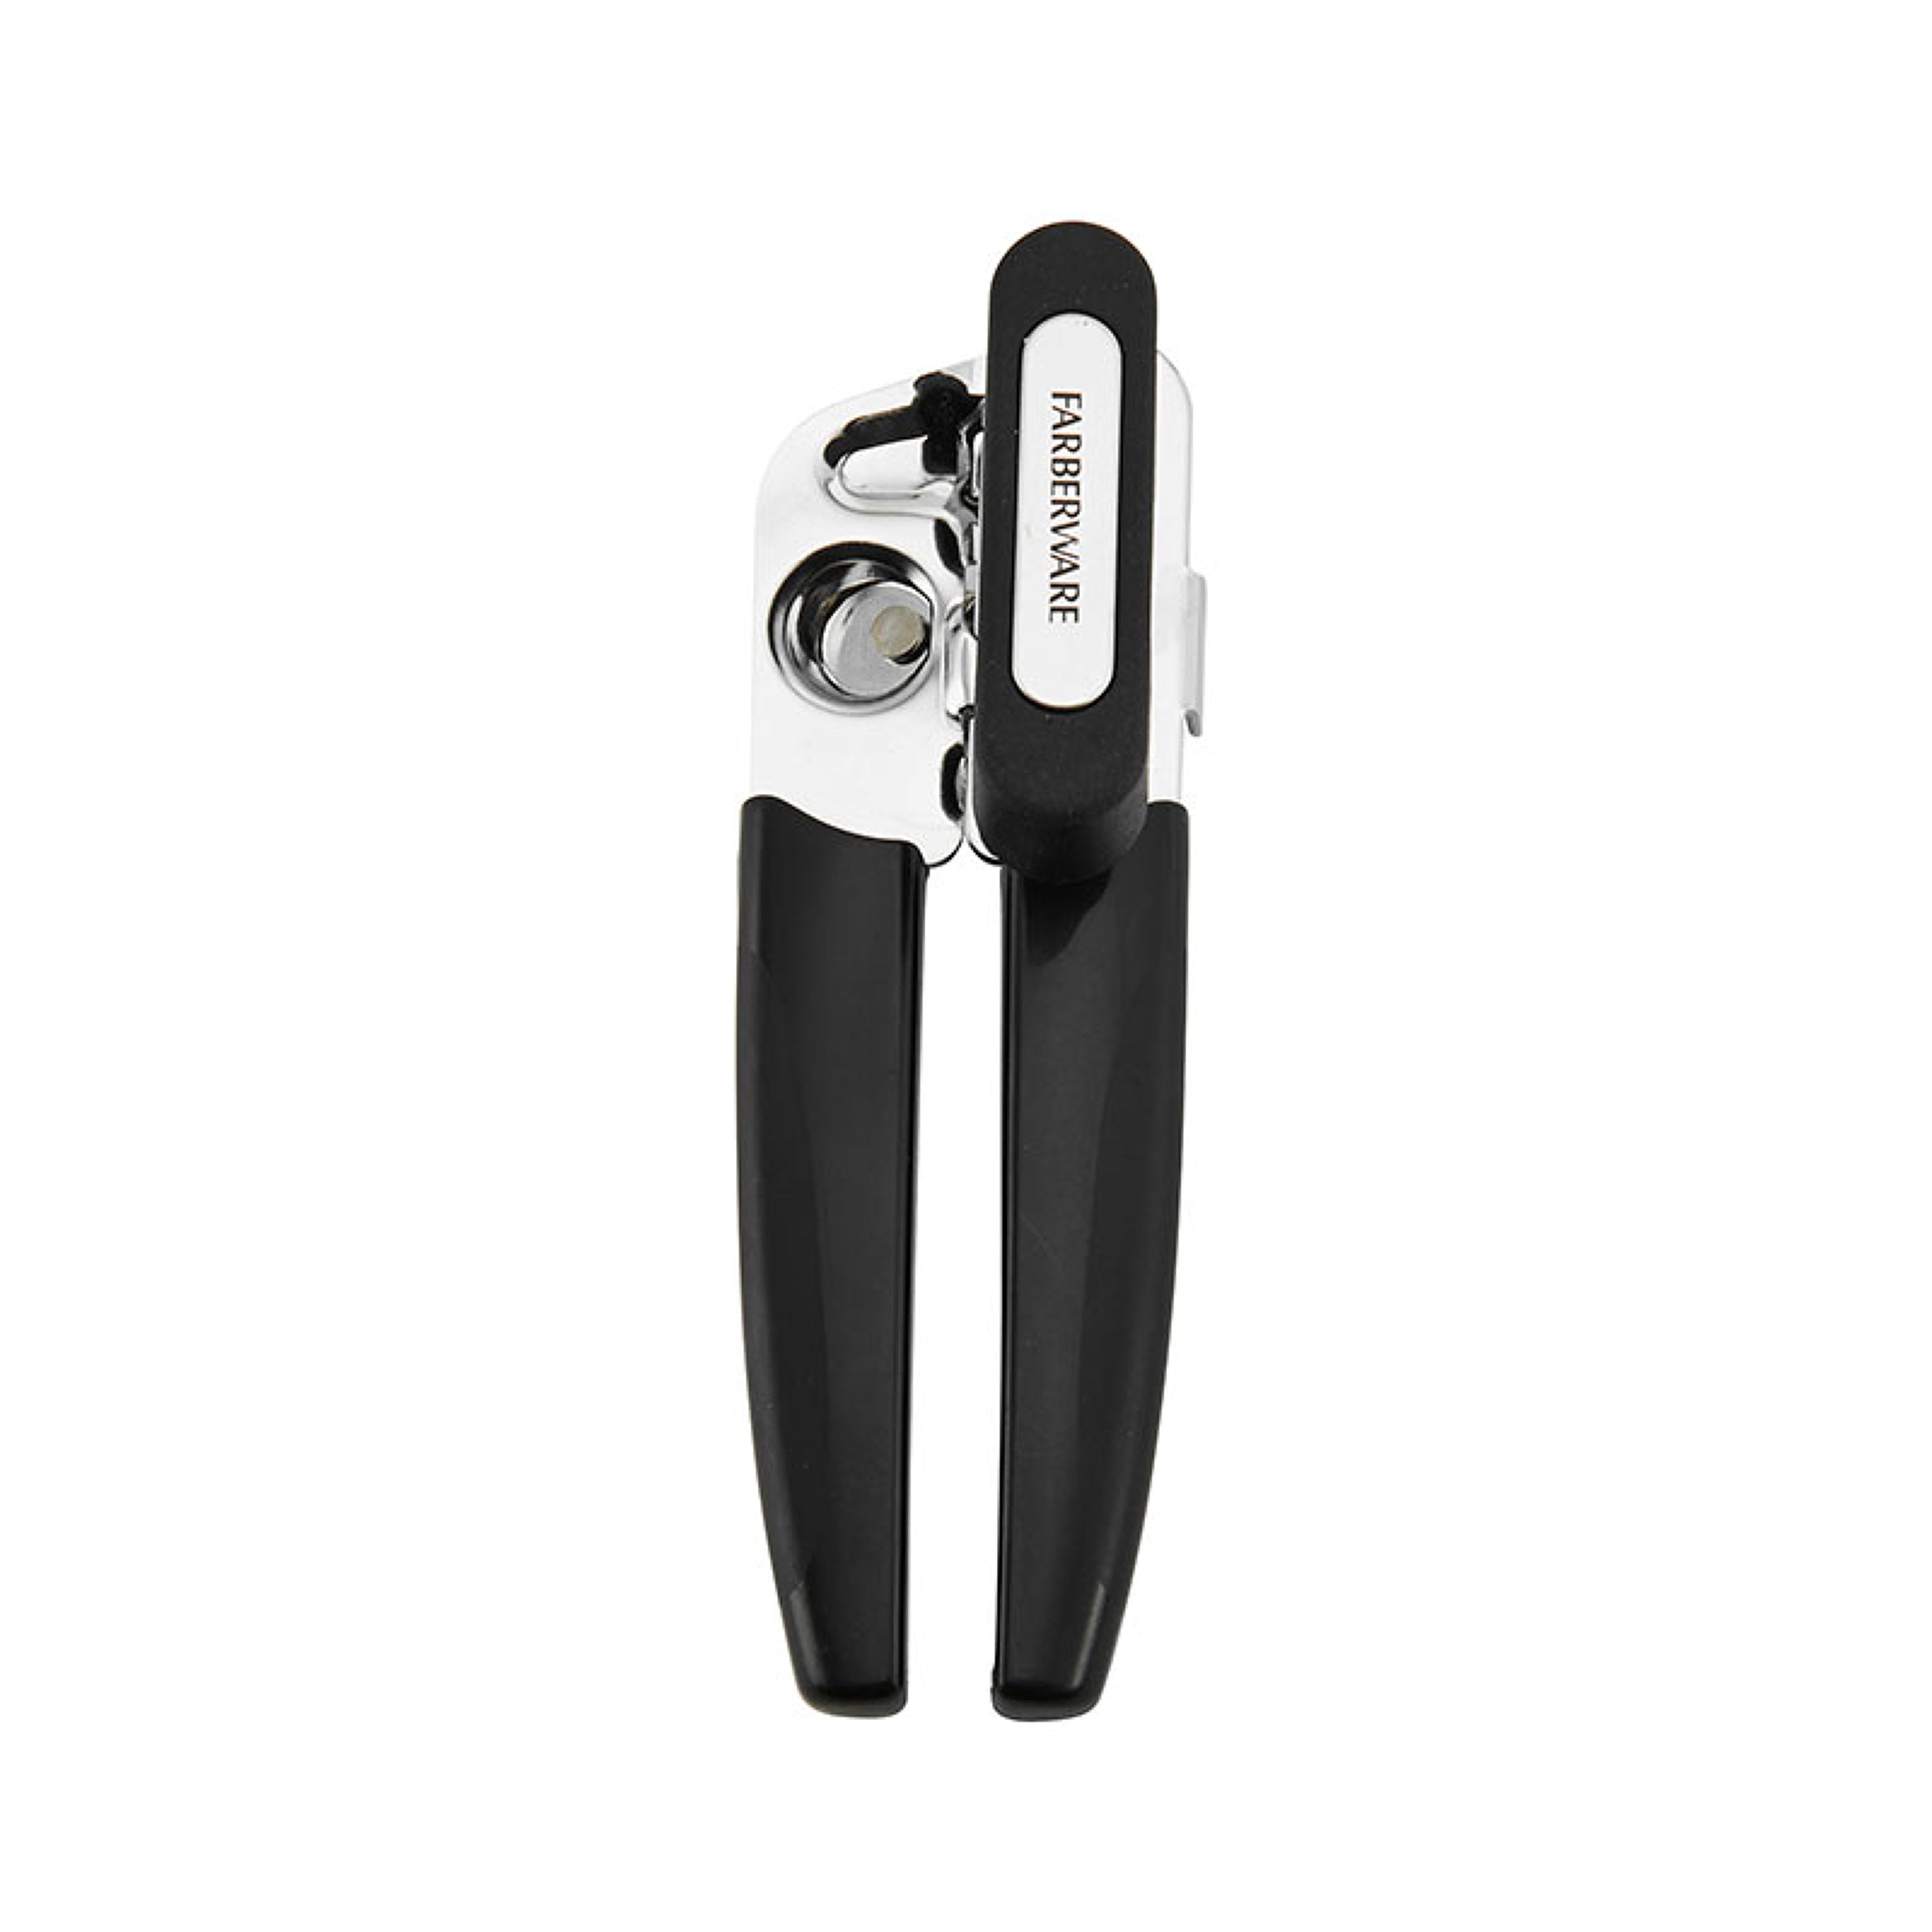 Farberware Professional Portable Can Opener with Black